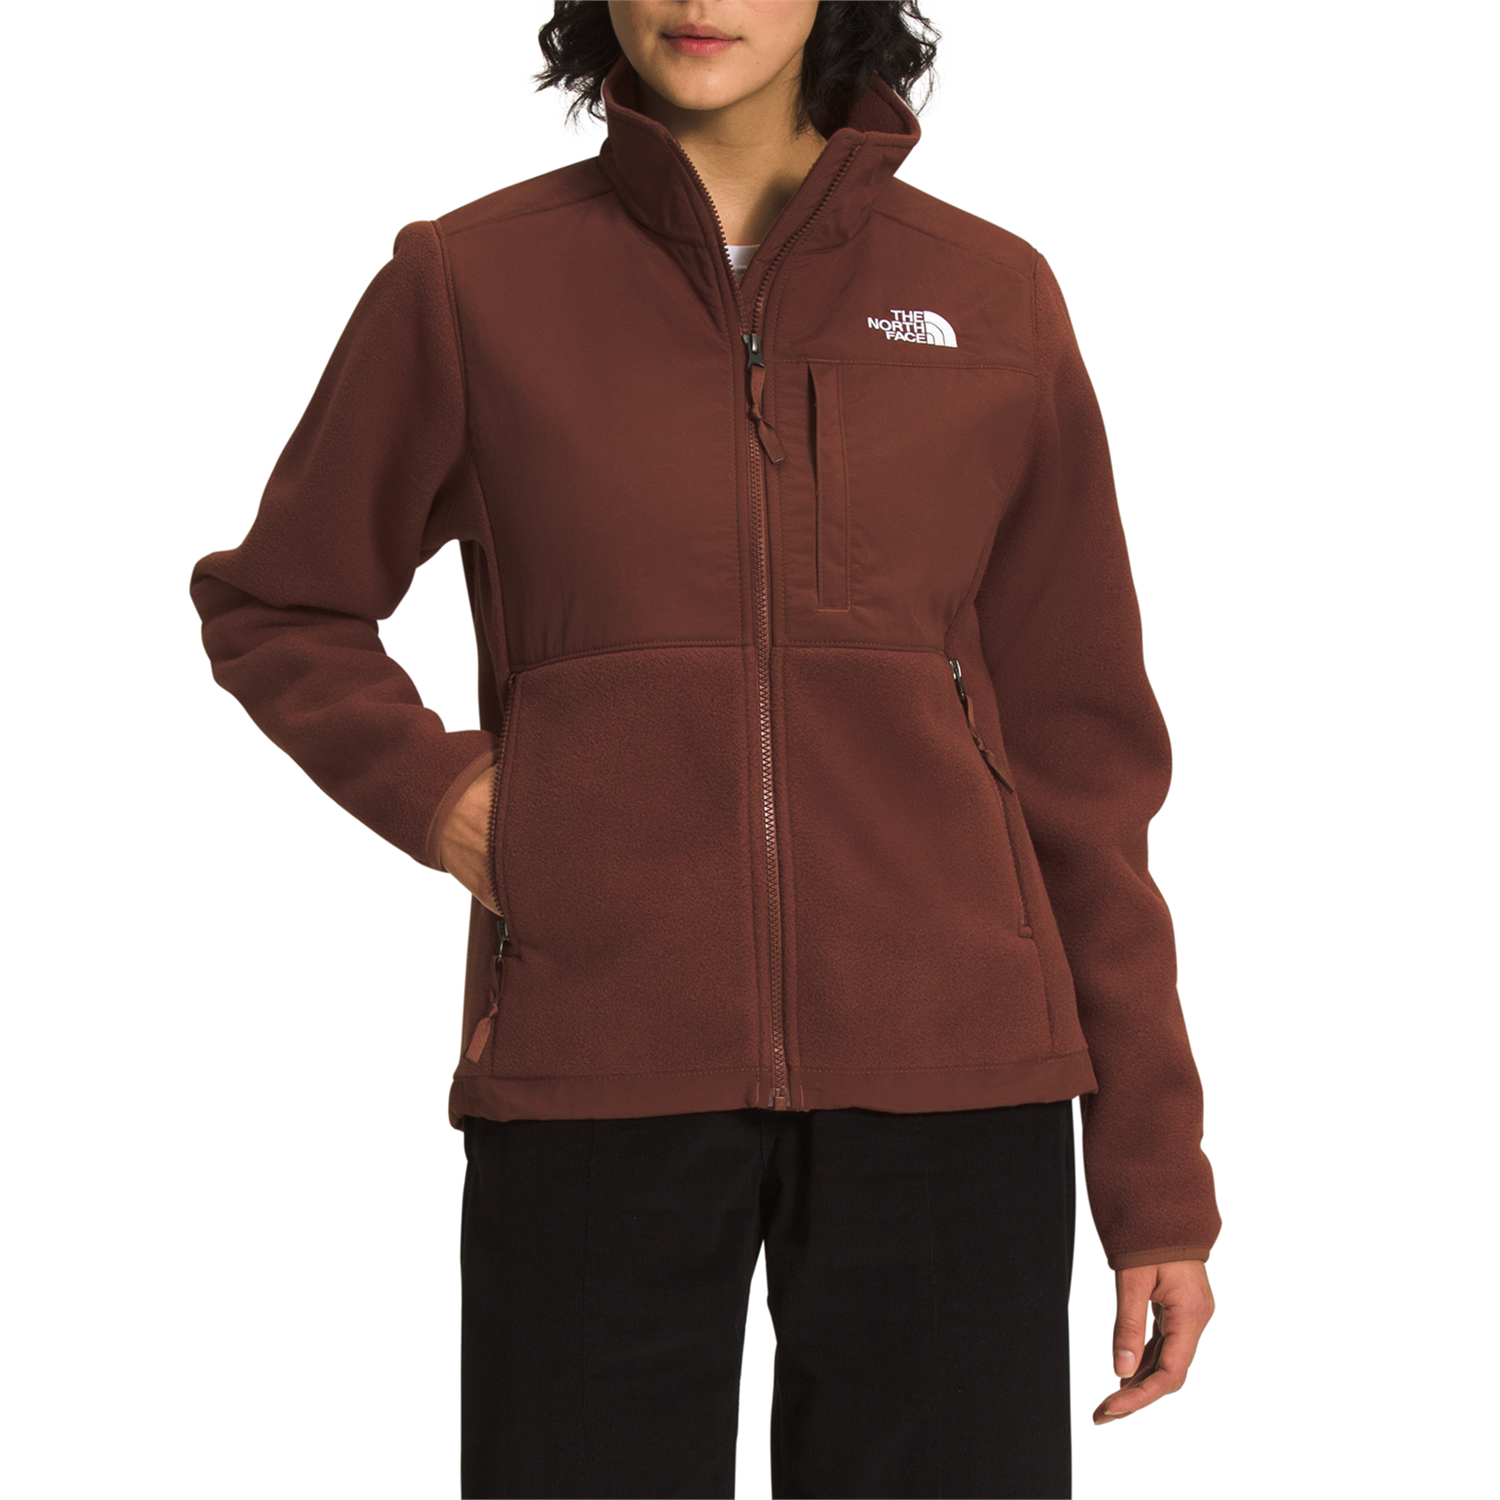 The North Face Candescent Pullover Sweater (Women's)